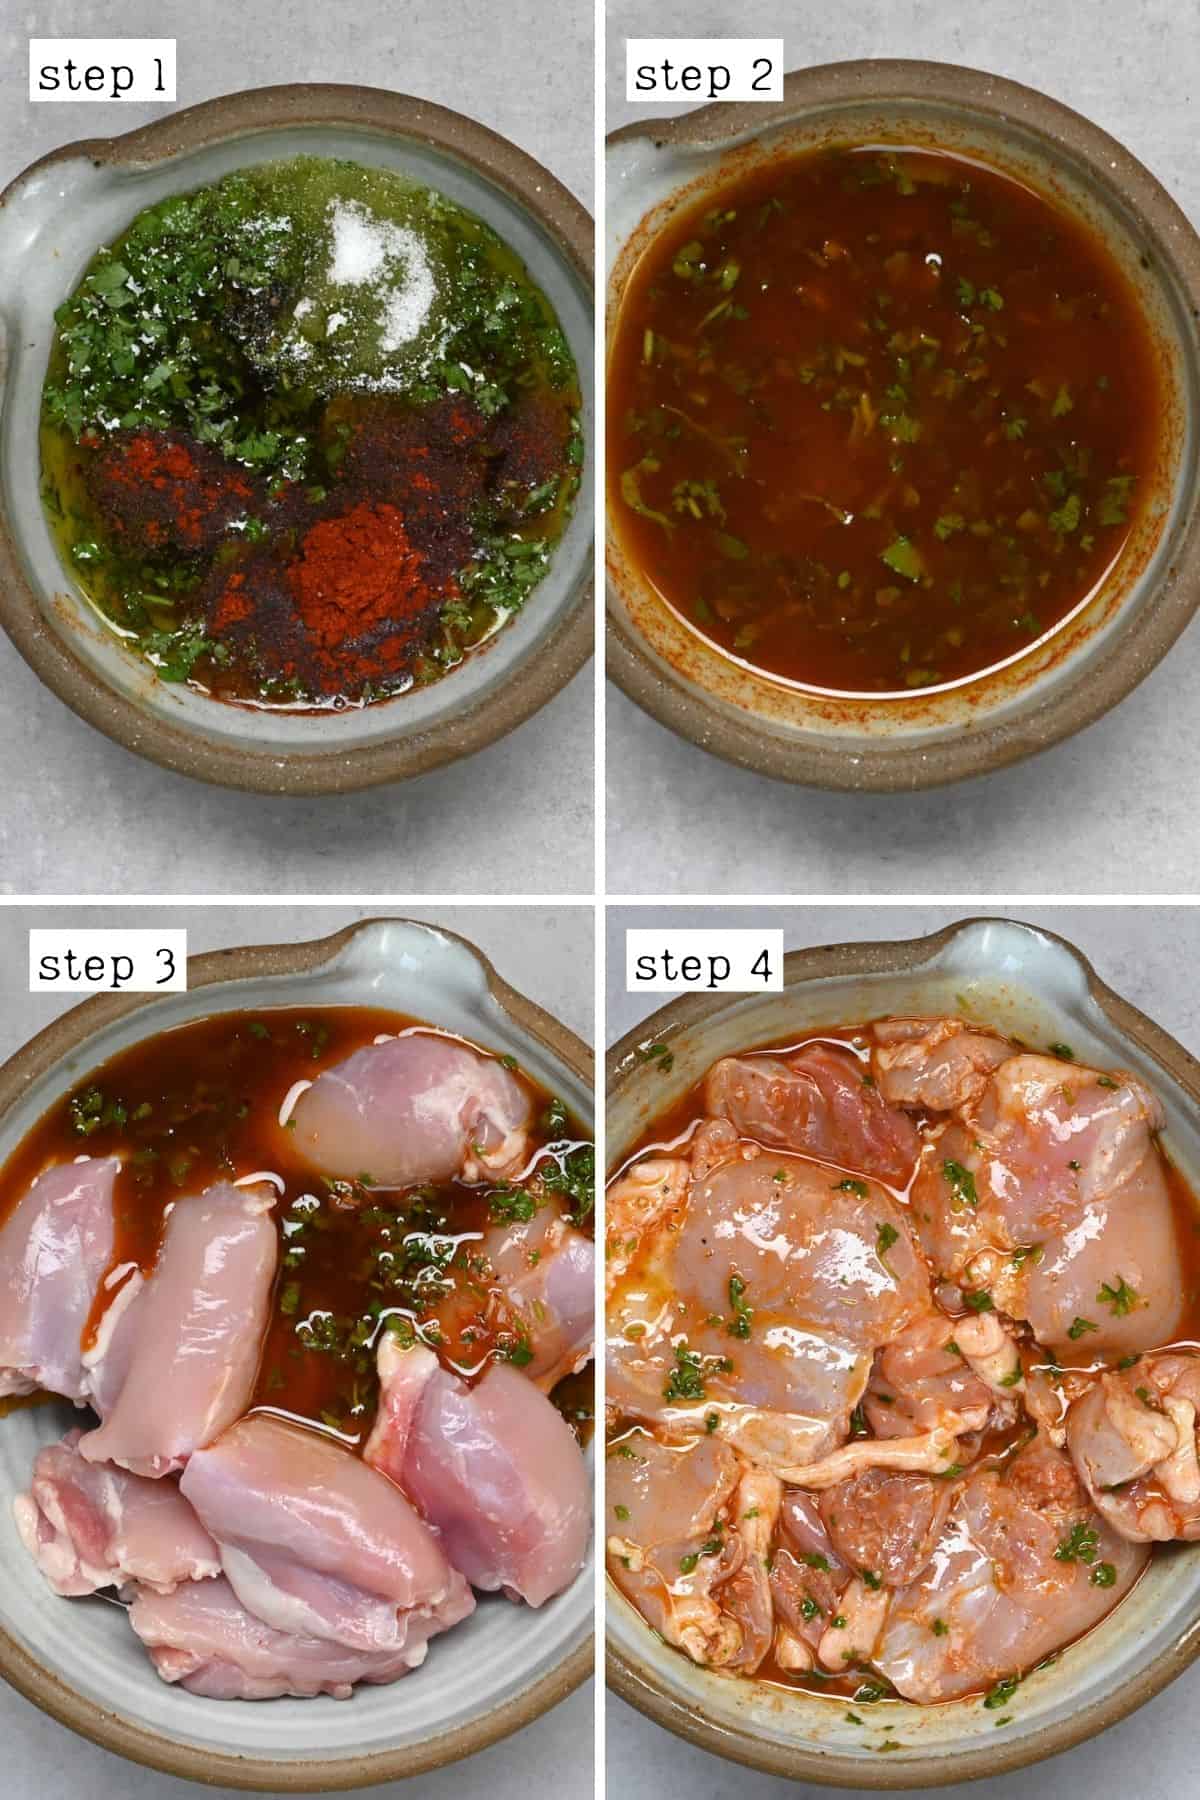 Steps for marinating chicken thighs